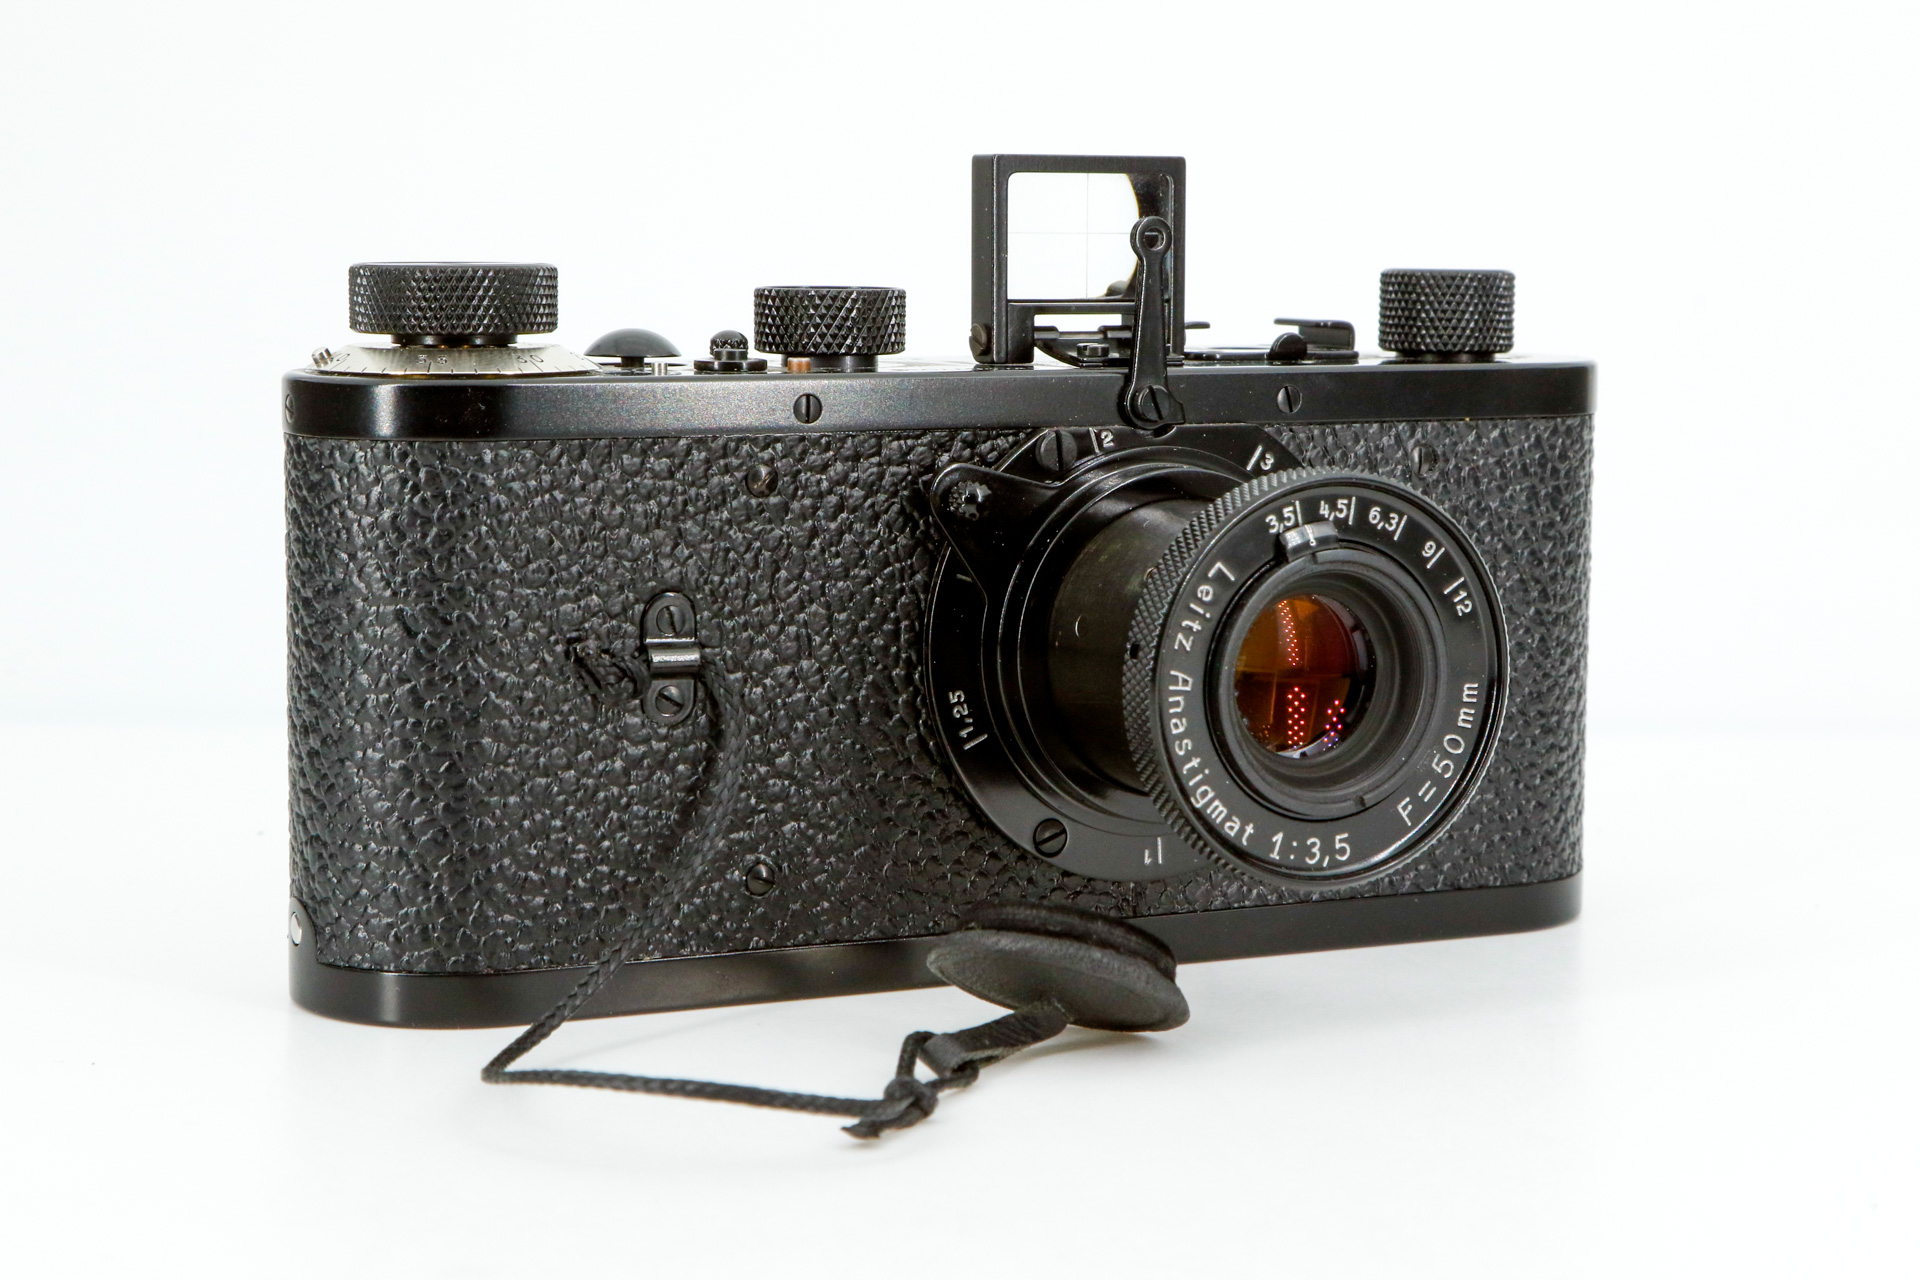 LEICA "0-Serie" with 3,5 F=50mm Anastigmat